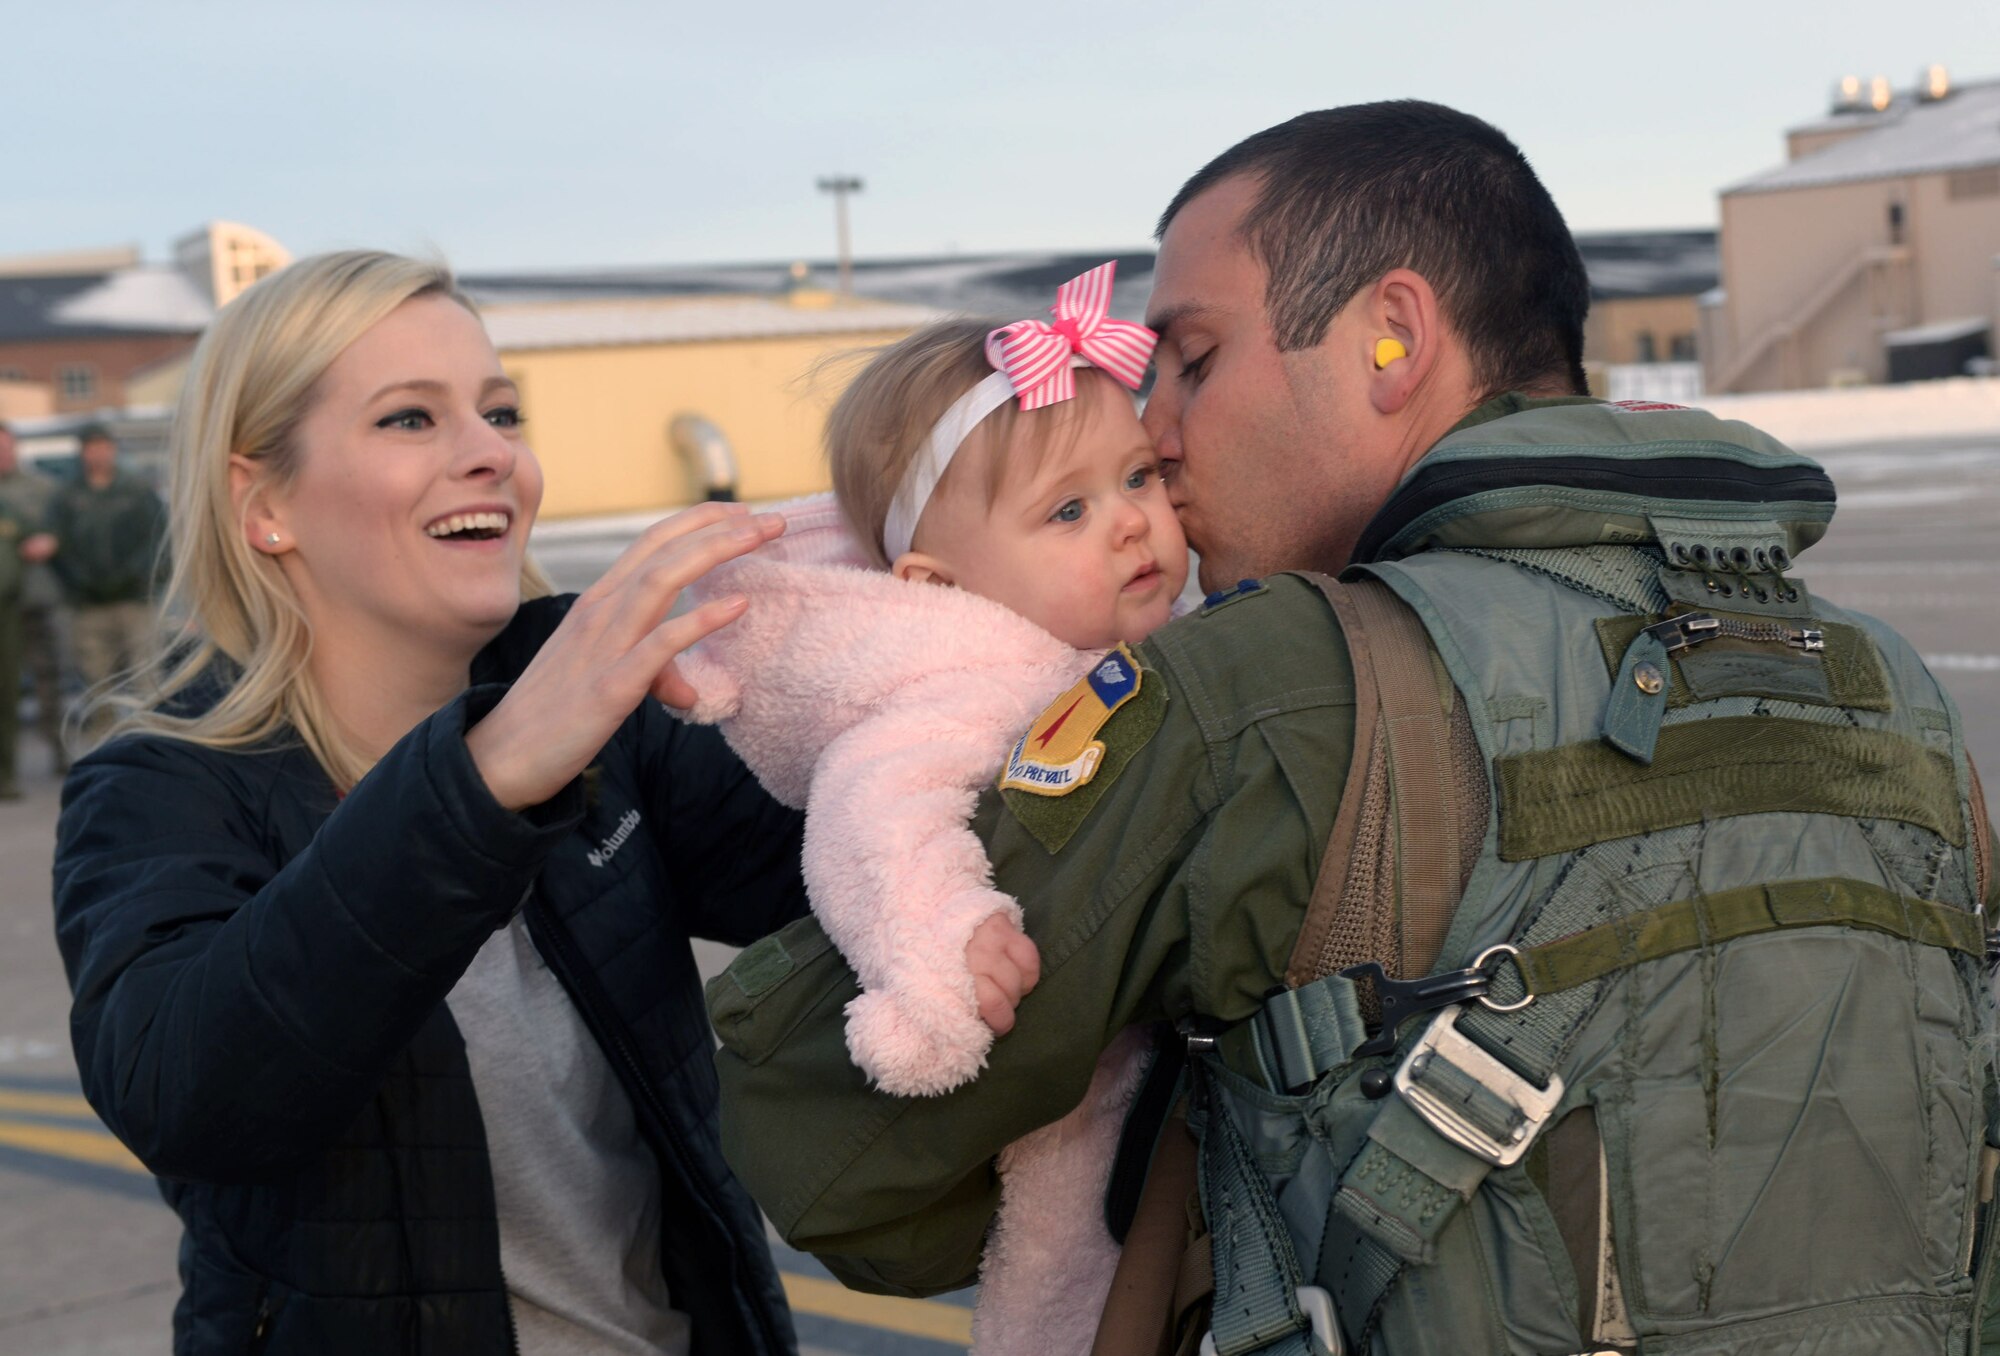 Capt. Alex, a pilot assigned to the 34th Expeditionary Bomb Squadron, reunites with his wife, Becky, and his daughter, Grace, at Ellsworth Air Force Base, S.D., Feb. 8, 2017, after his deployment to Guam, in support of the U.S. Pacific Command’s Continuous Bomber Presence mission. Members of the 34th EBS flew a total of 242 sorties during the deployment. (U.S. Air Force photo by Airman 1st Class Donald C. Knechtel)